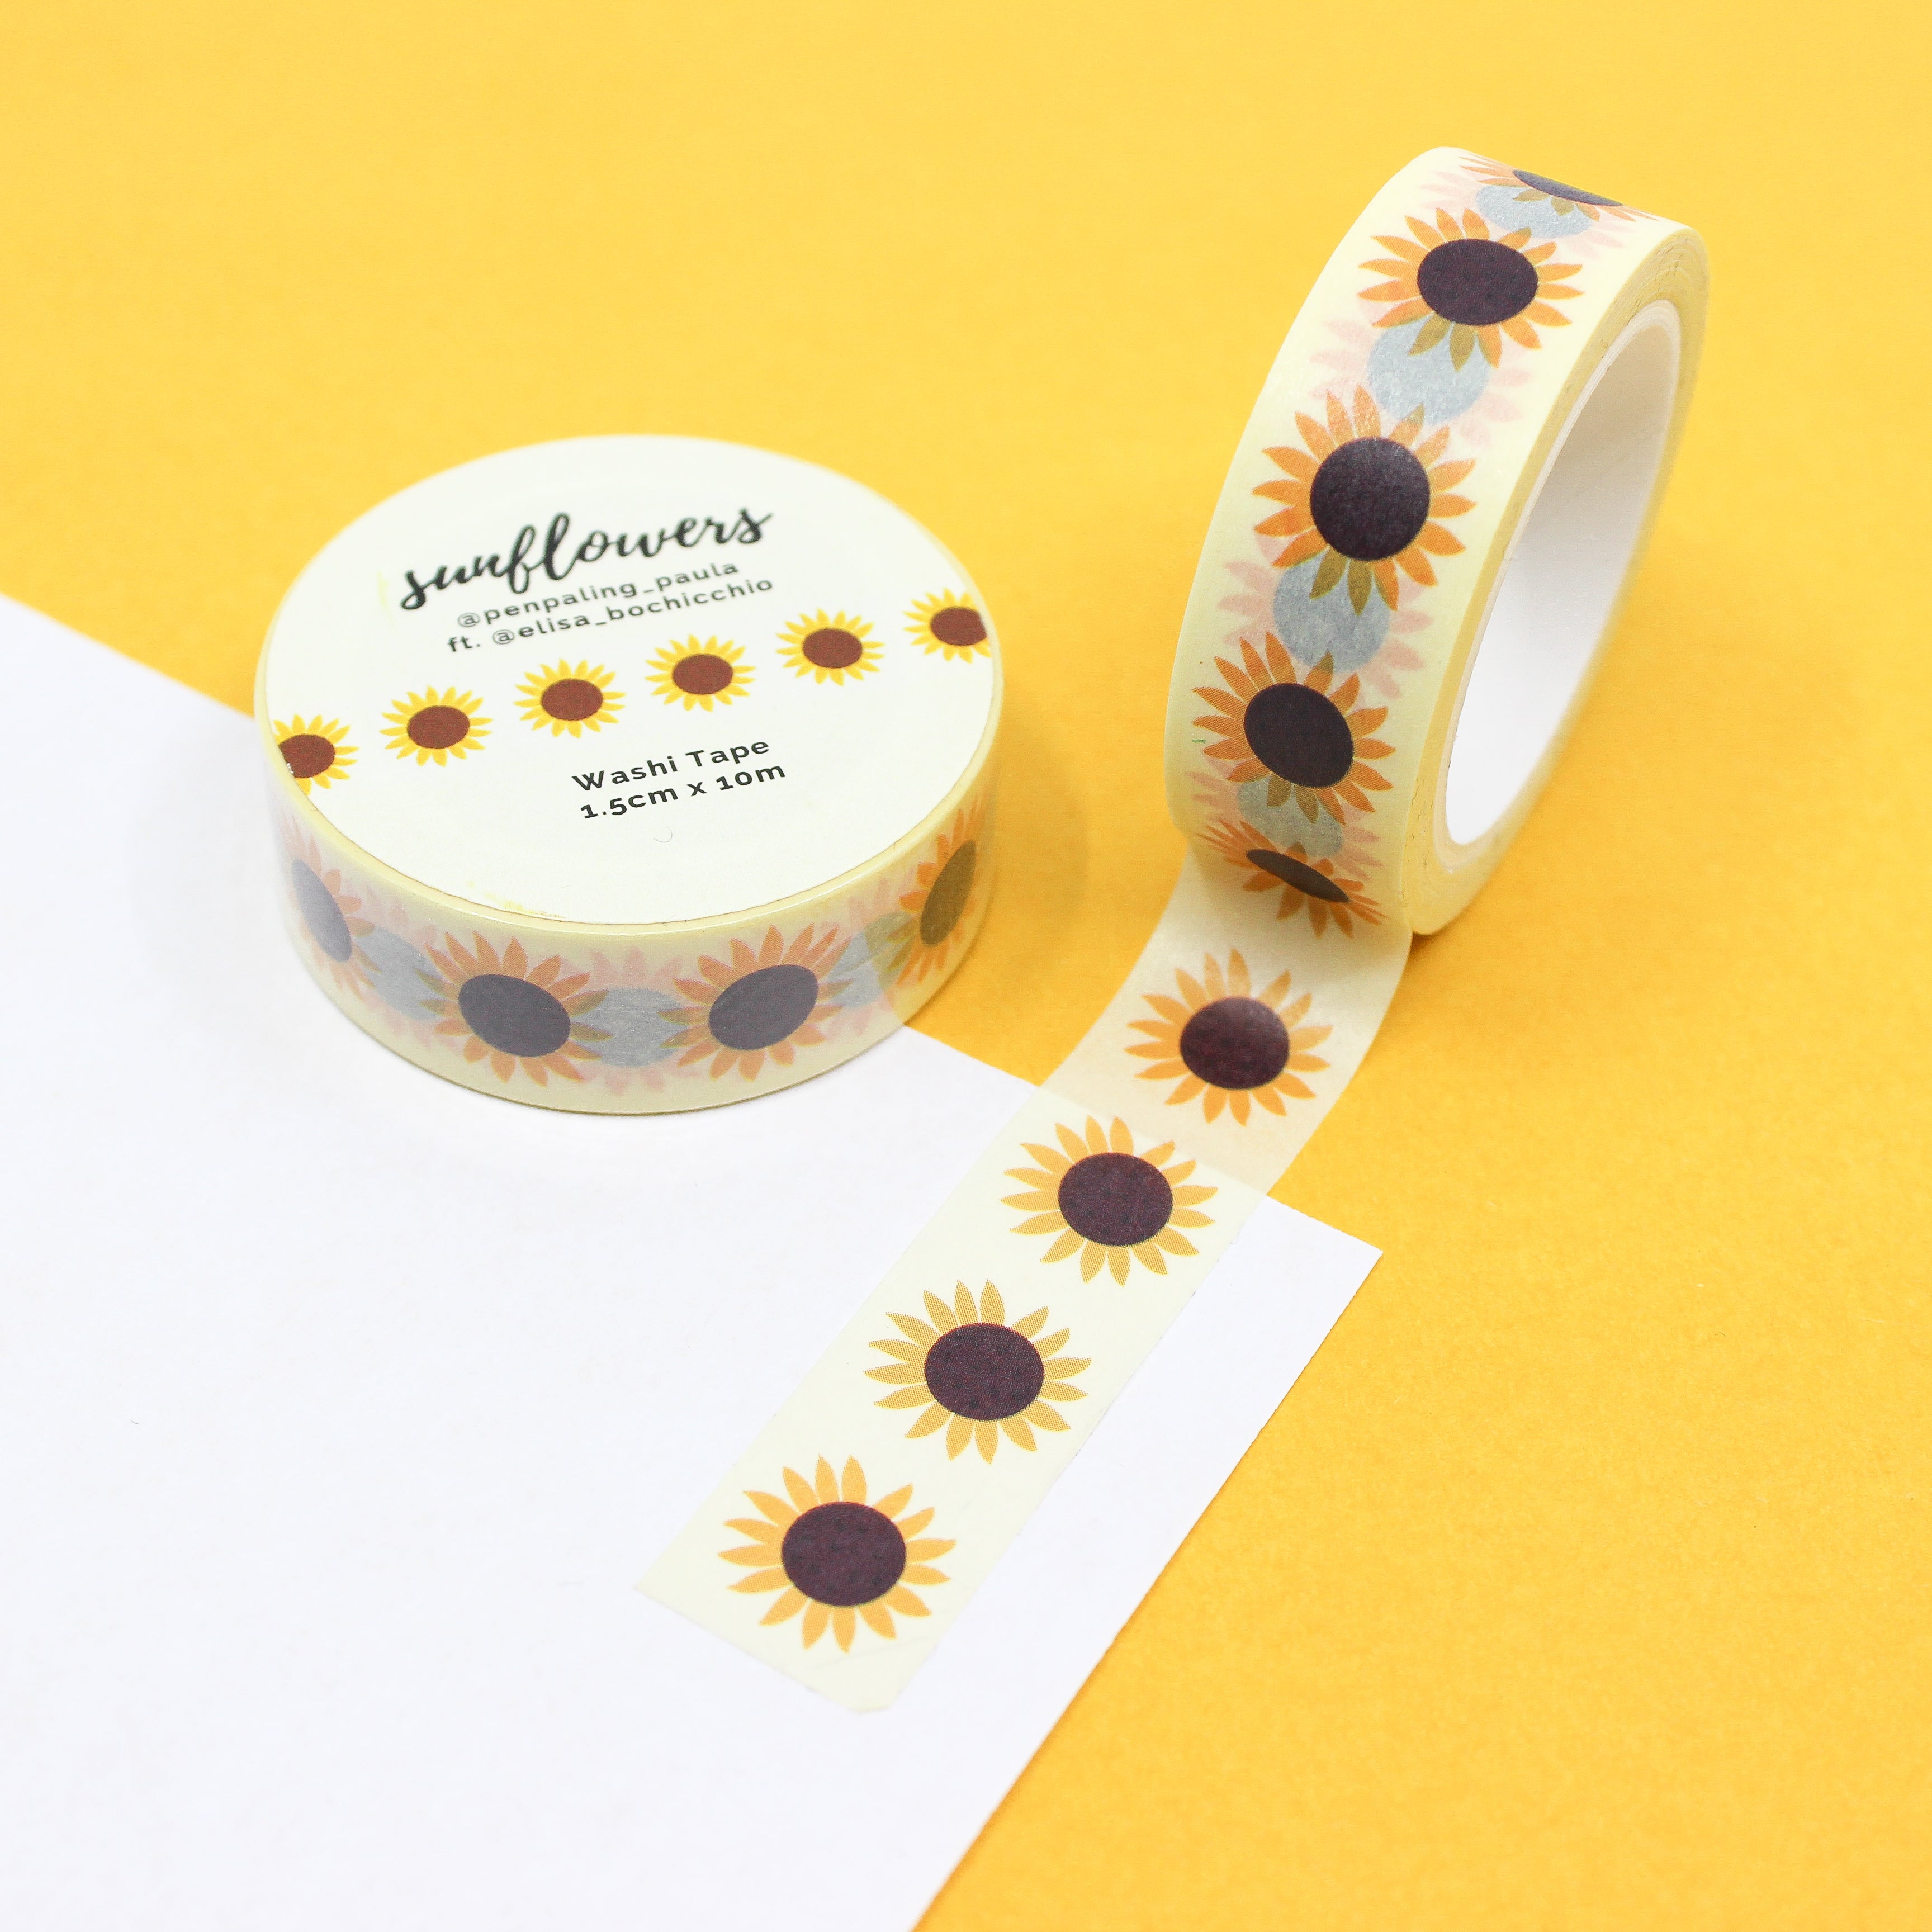 This is a yellow sunflower washi tape from BBB Supplies Craft Shop